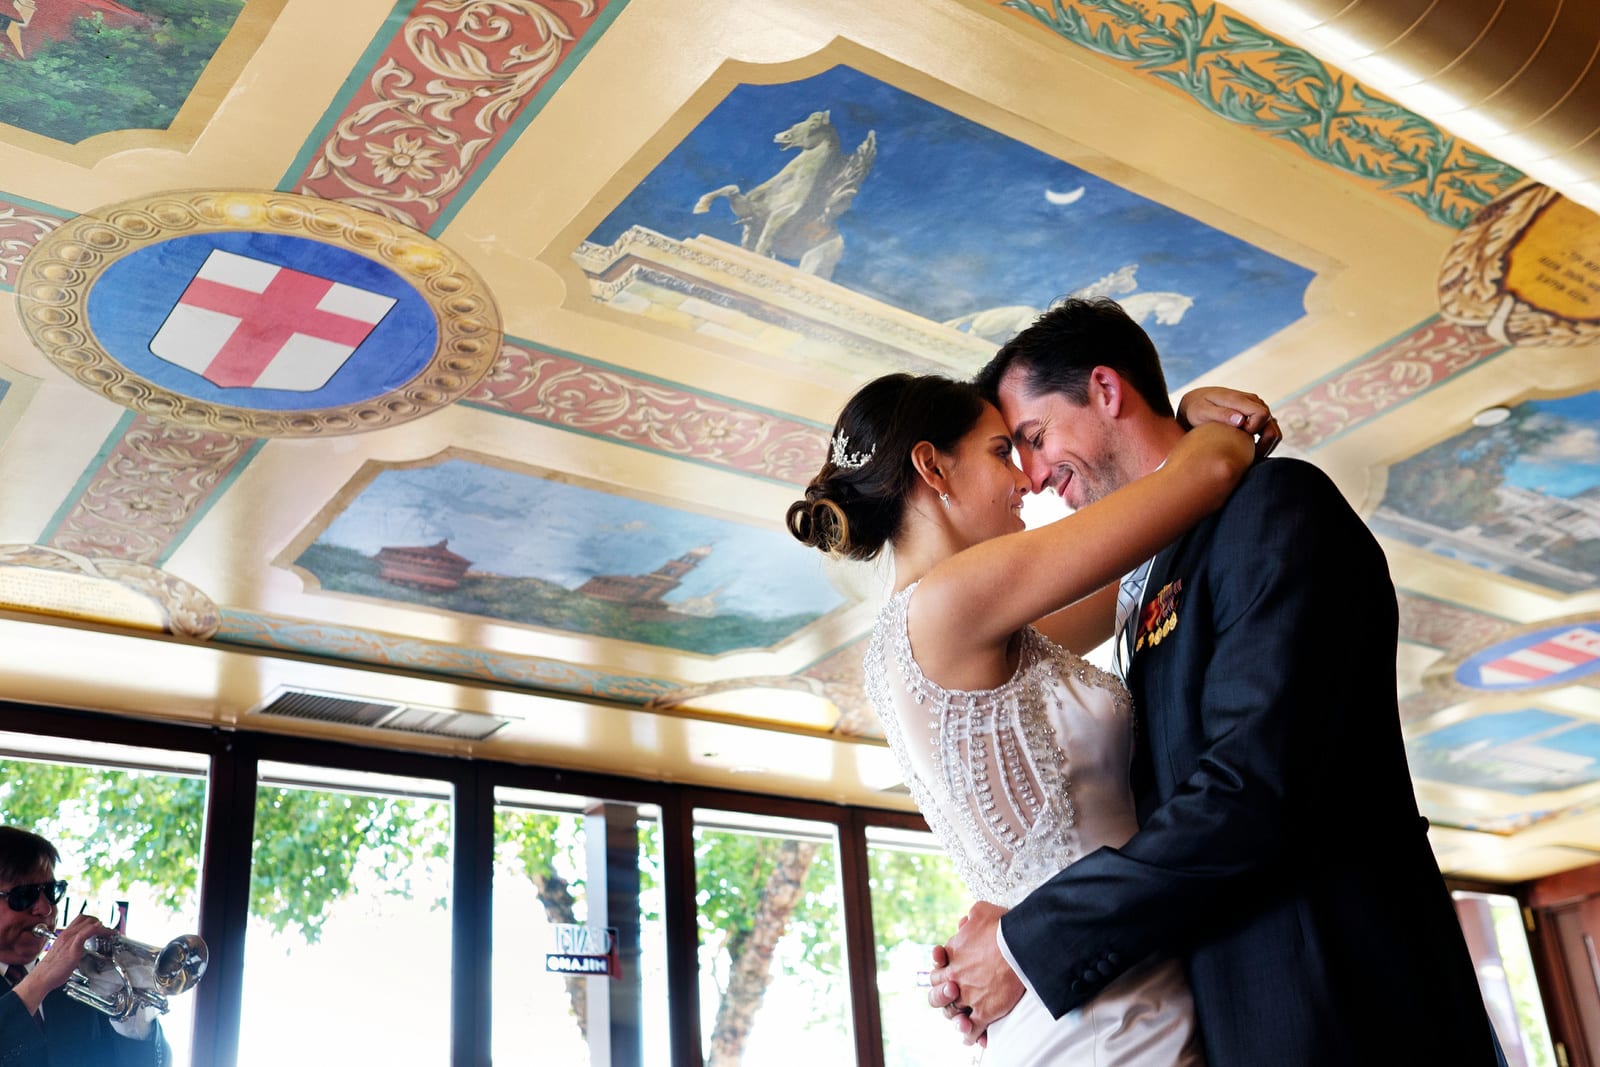 A bride and groom dance forehead to forehead beneath the painted ceiling during their wedding at Cafe Milano in Washington, DC.